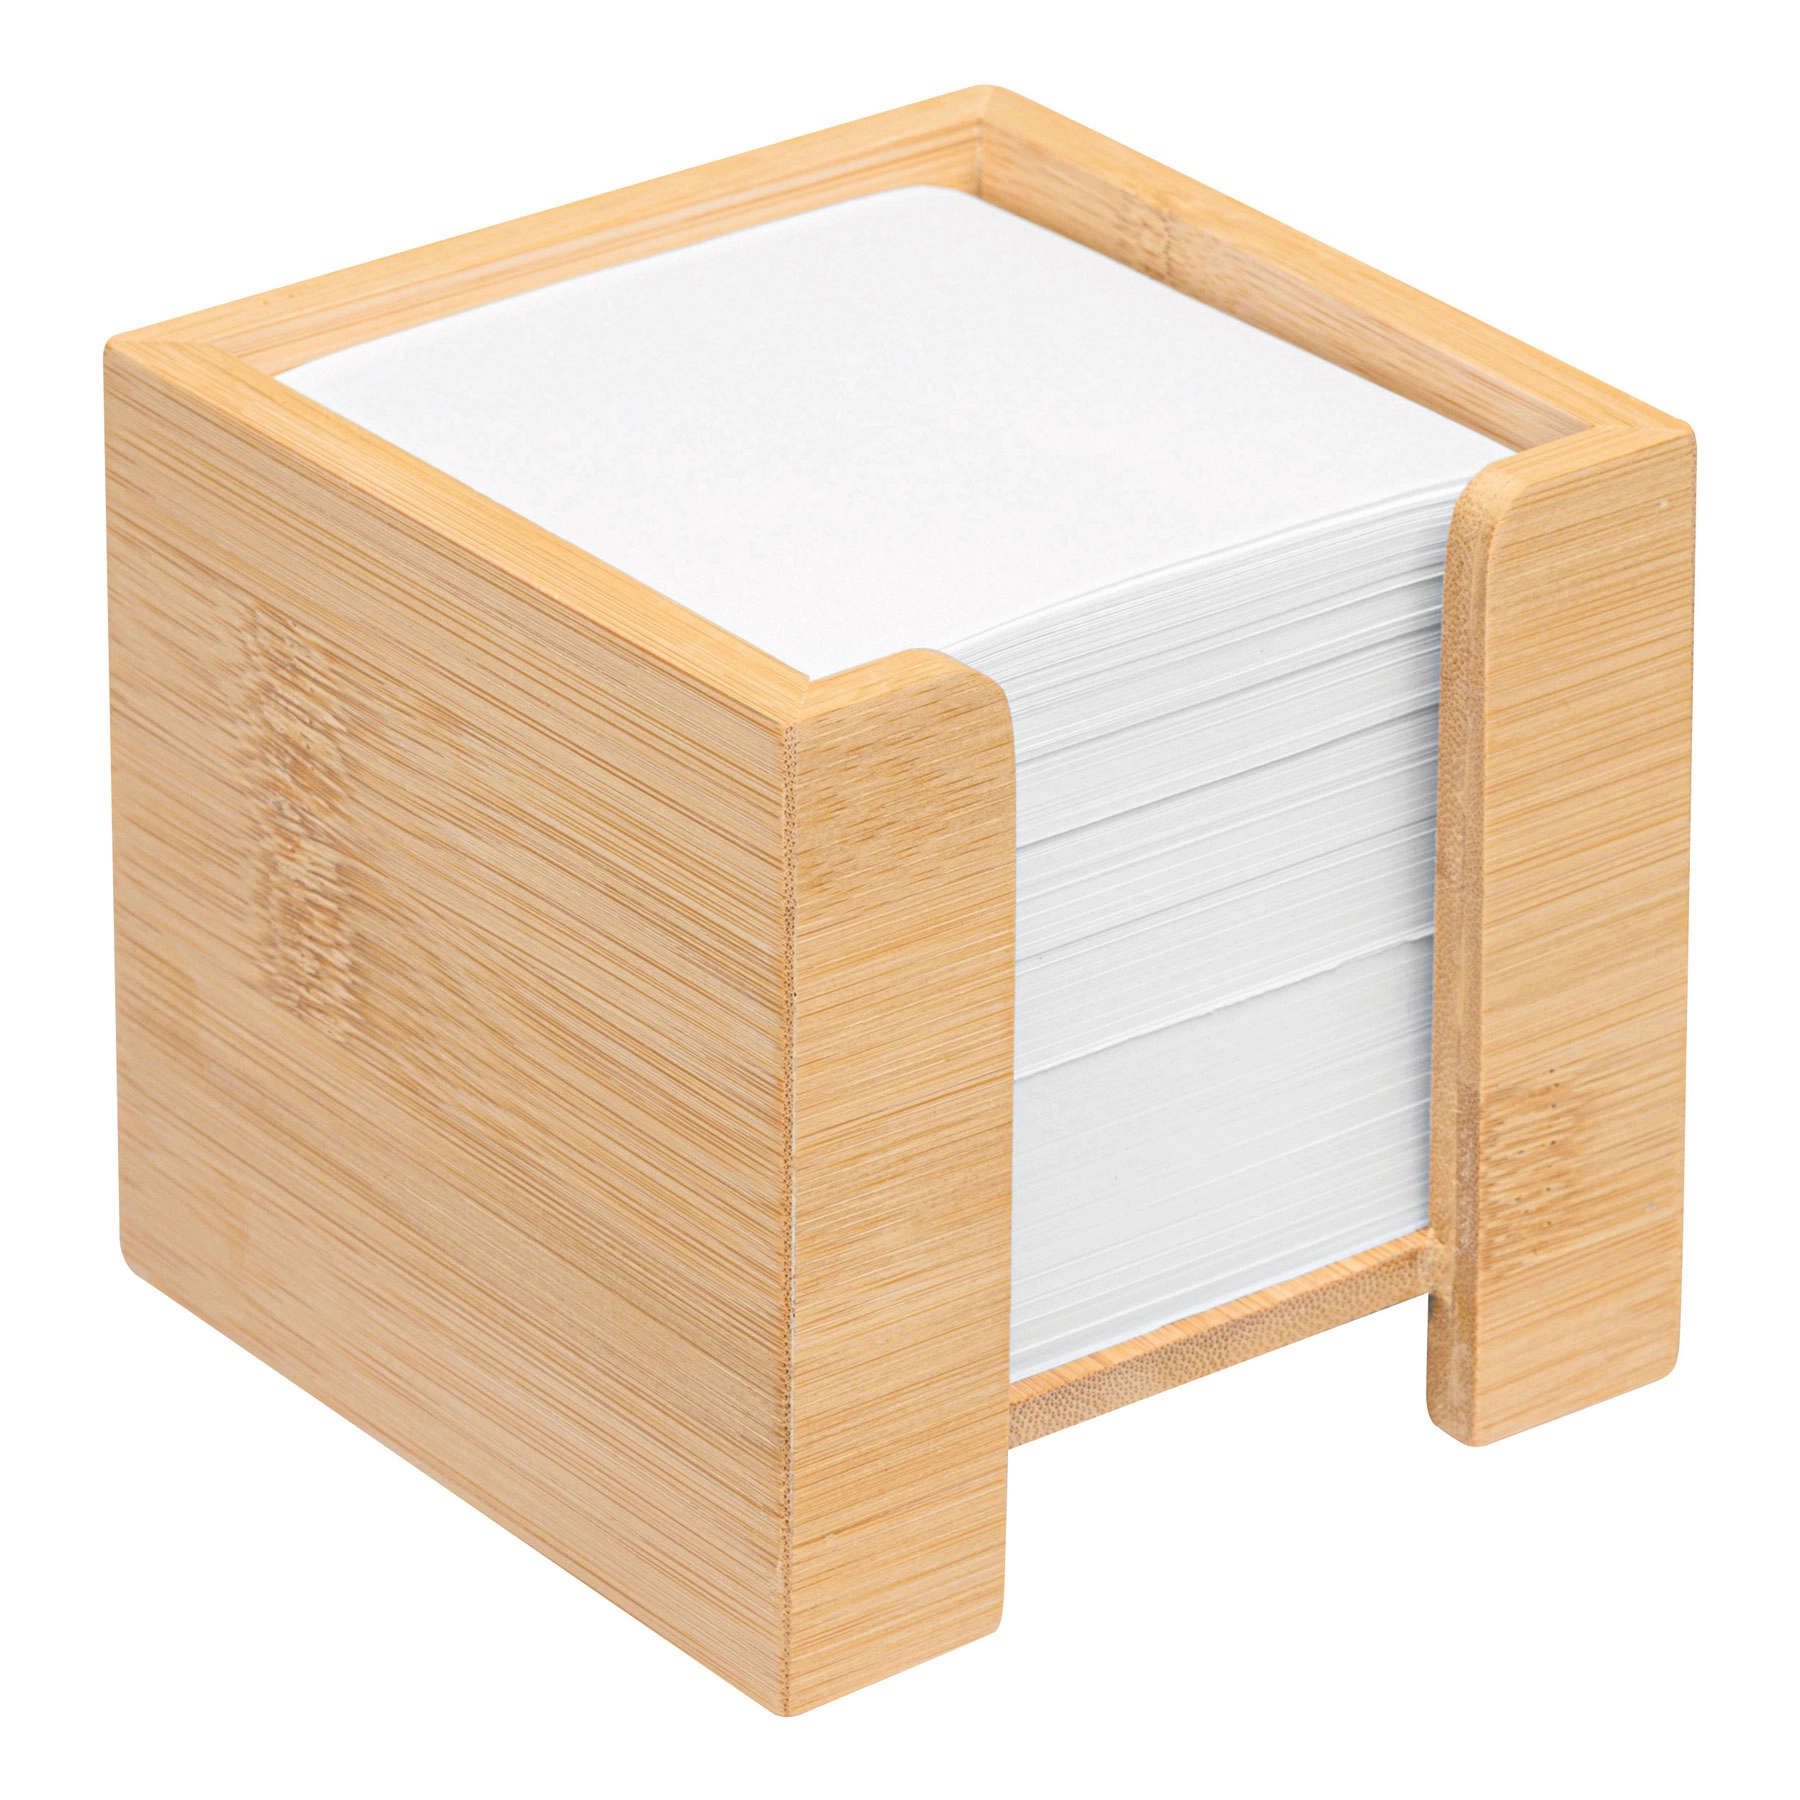 Memo cube NEVER FORGET BAMBOO, brązowy 56-1103333